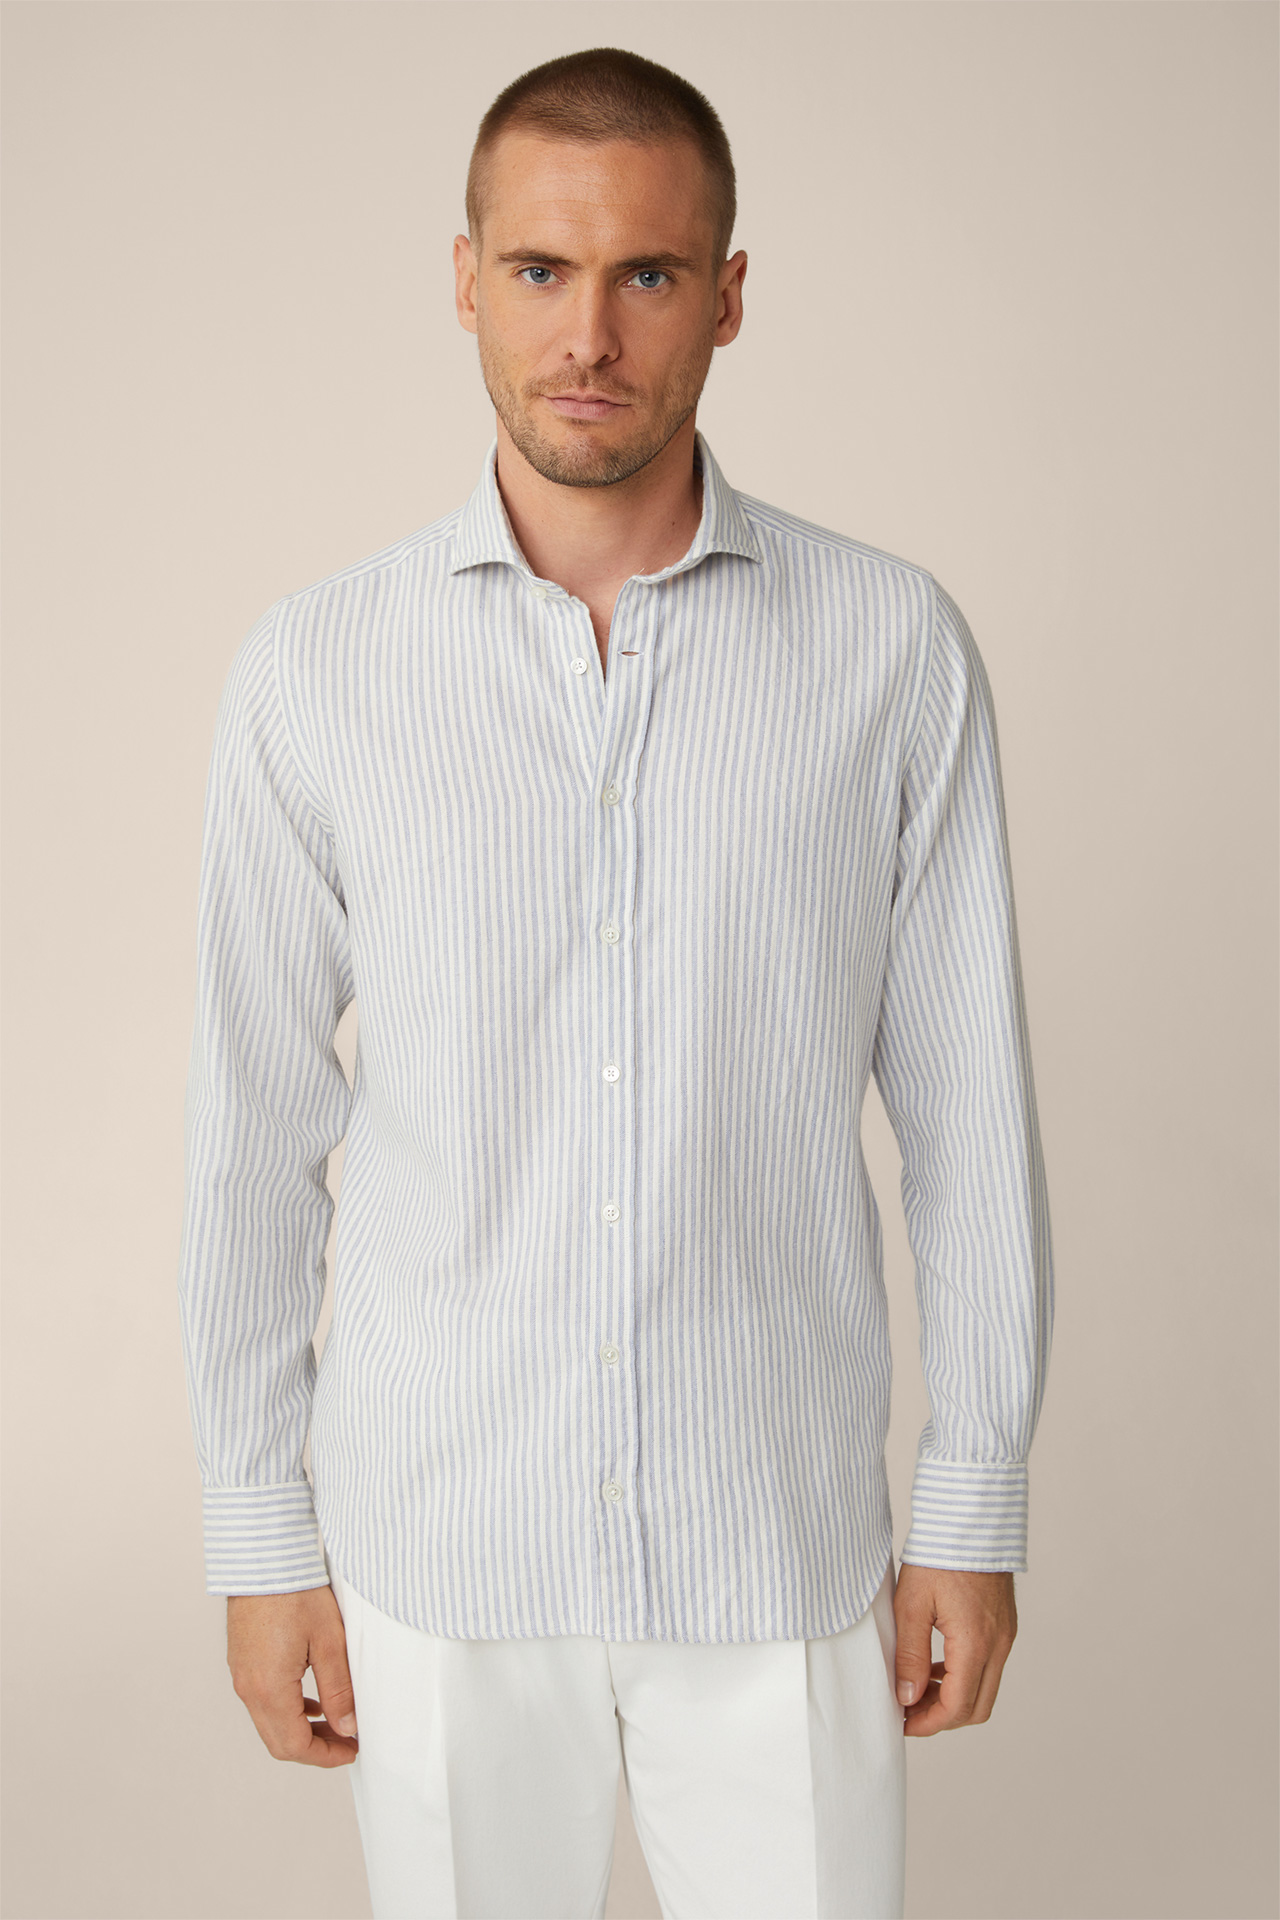 Lano Cotton Shirt in Blue and Wool White Stripes